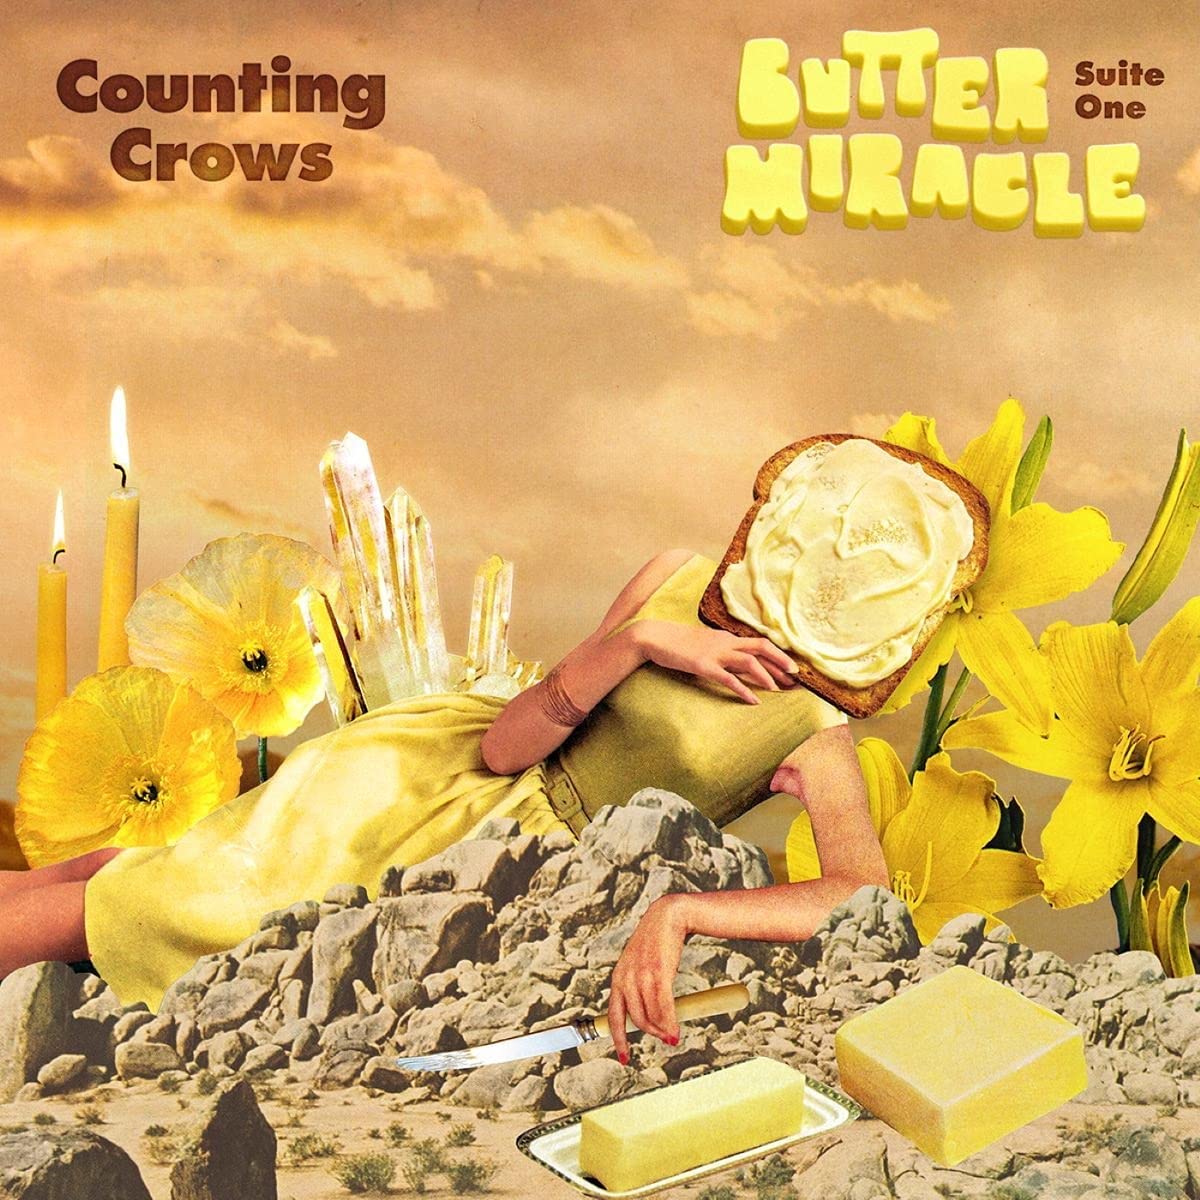 Counting Crows - Butter Miracle Suite One - LP